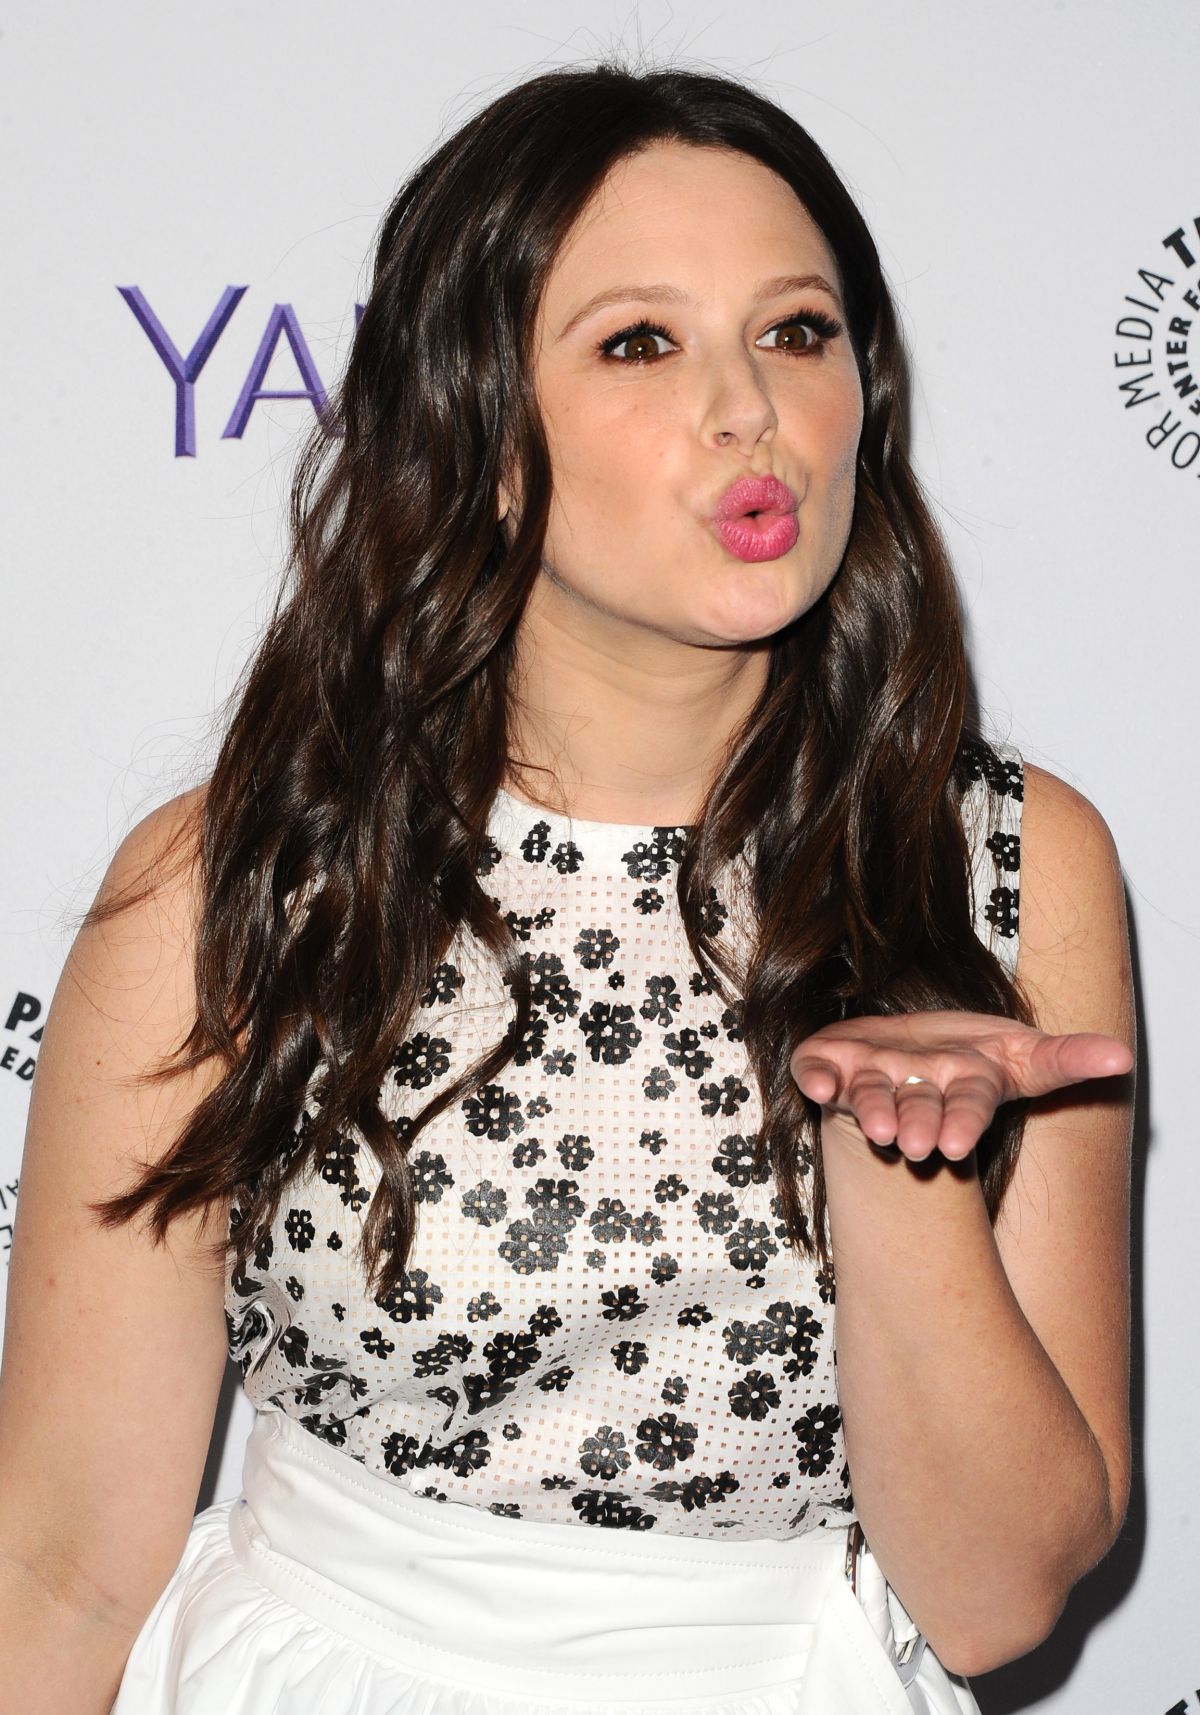 KATIE LOWES at 32nd Annual Paleyfest in Hollywood.